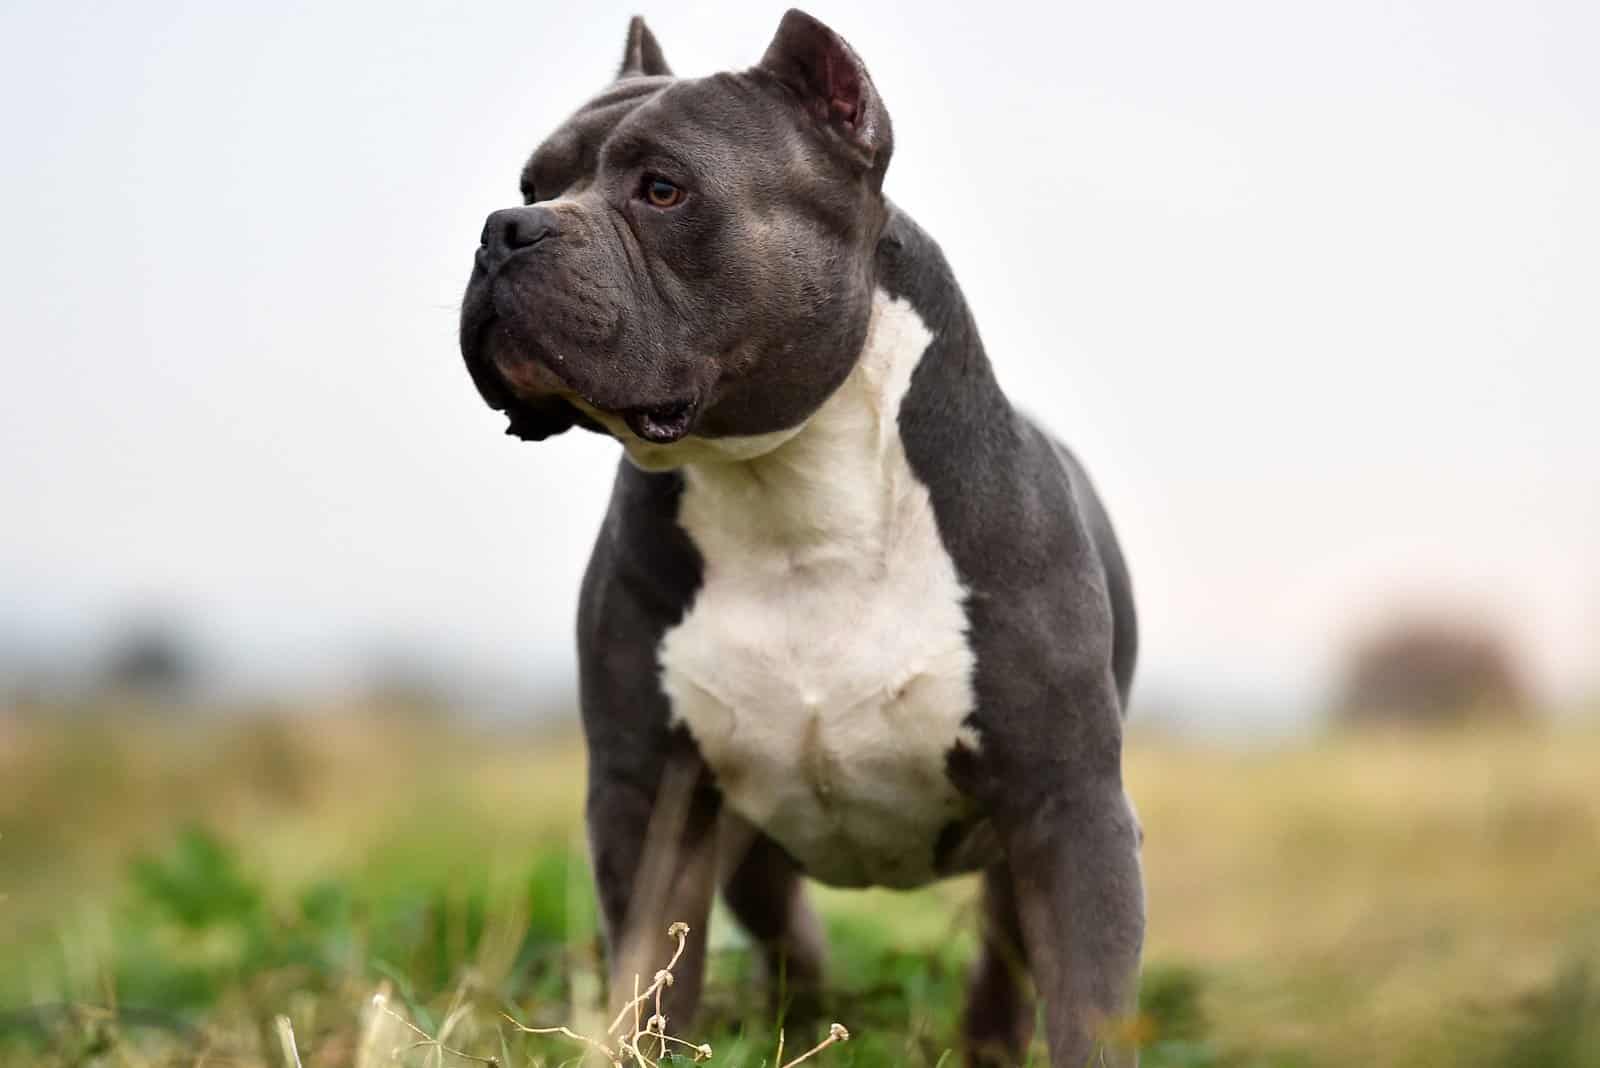 American Bully Growth Chart: Here's How Your Bully Grows